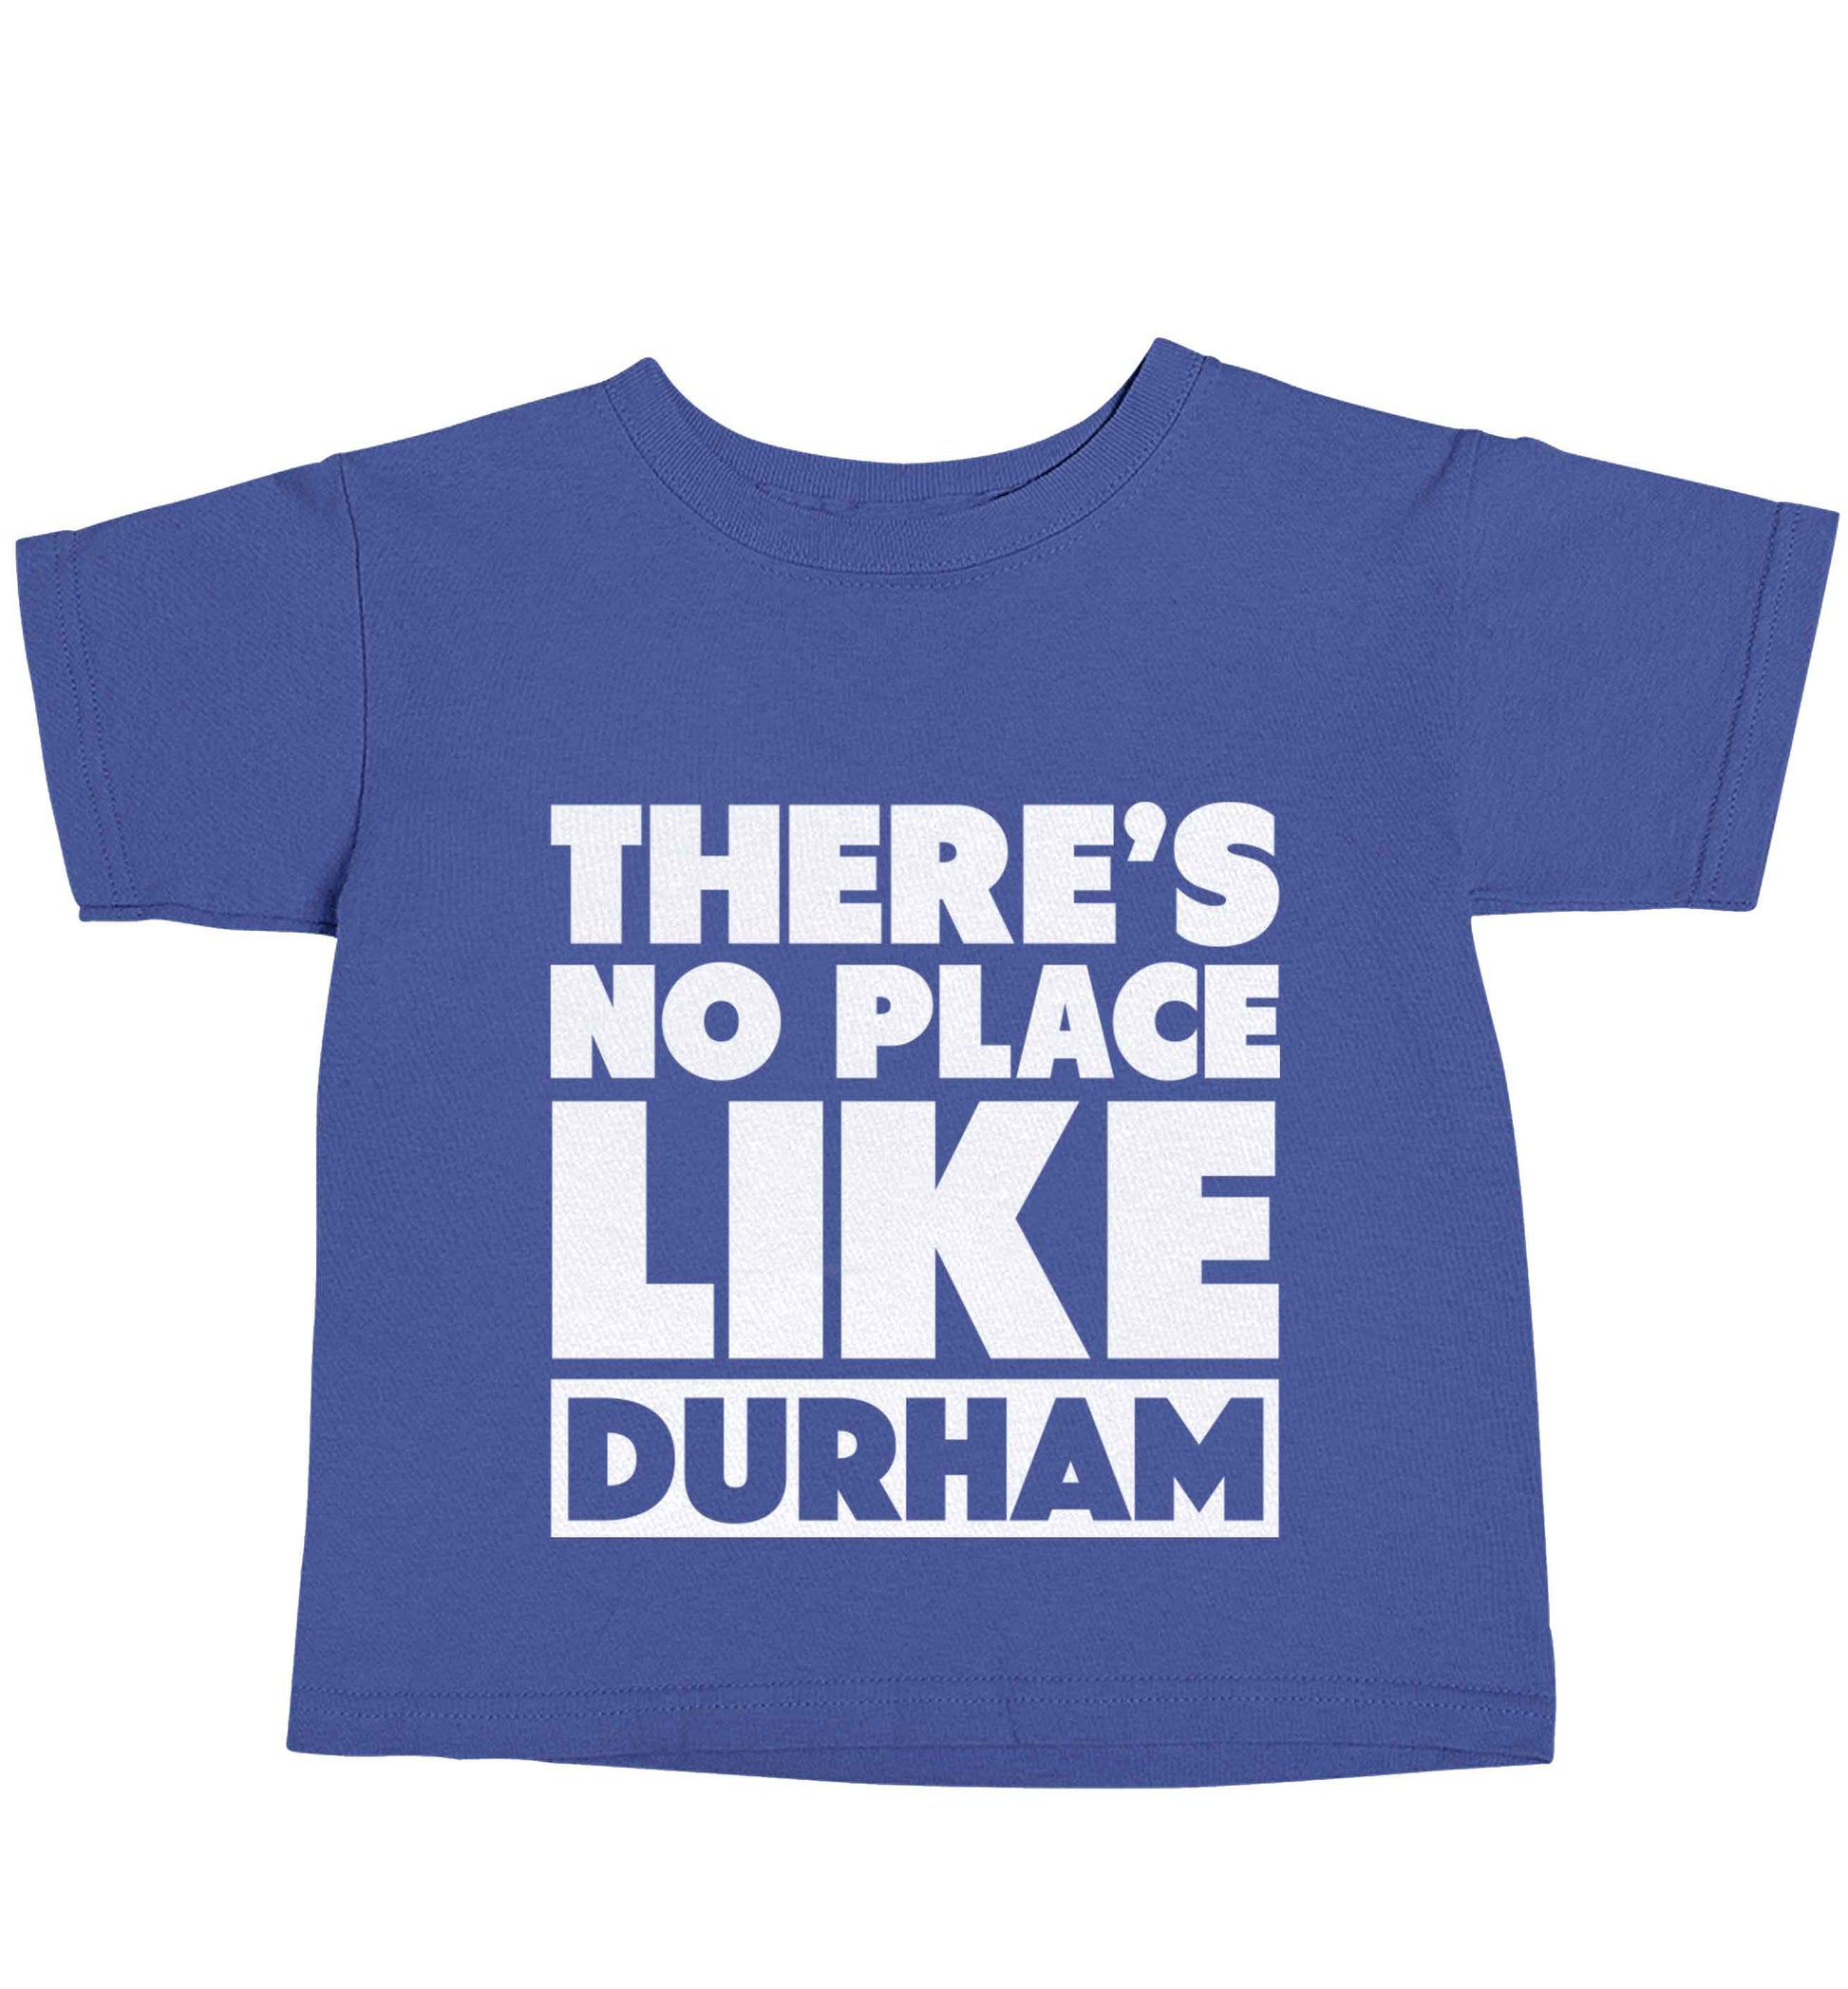 There's no place like Durham blue baby toddler Tshirt 2 Years